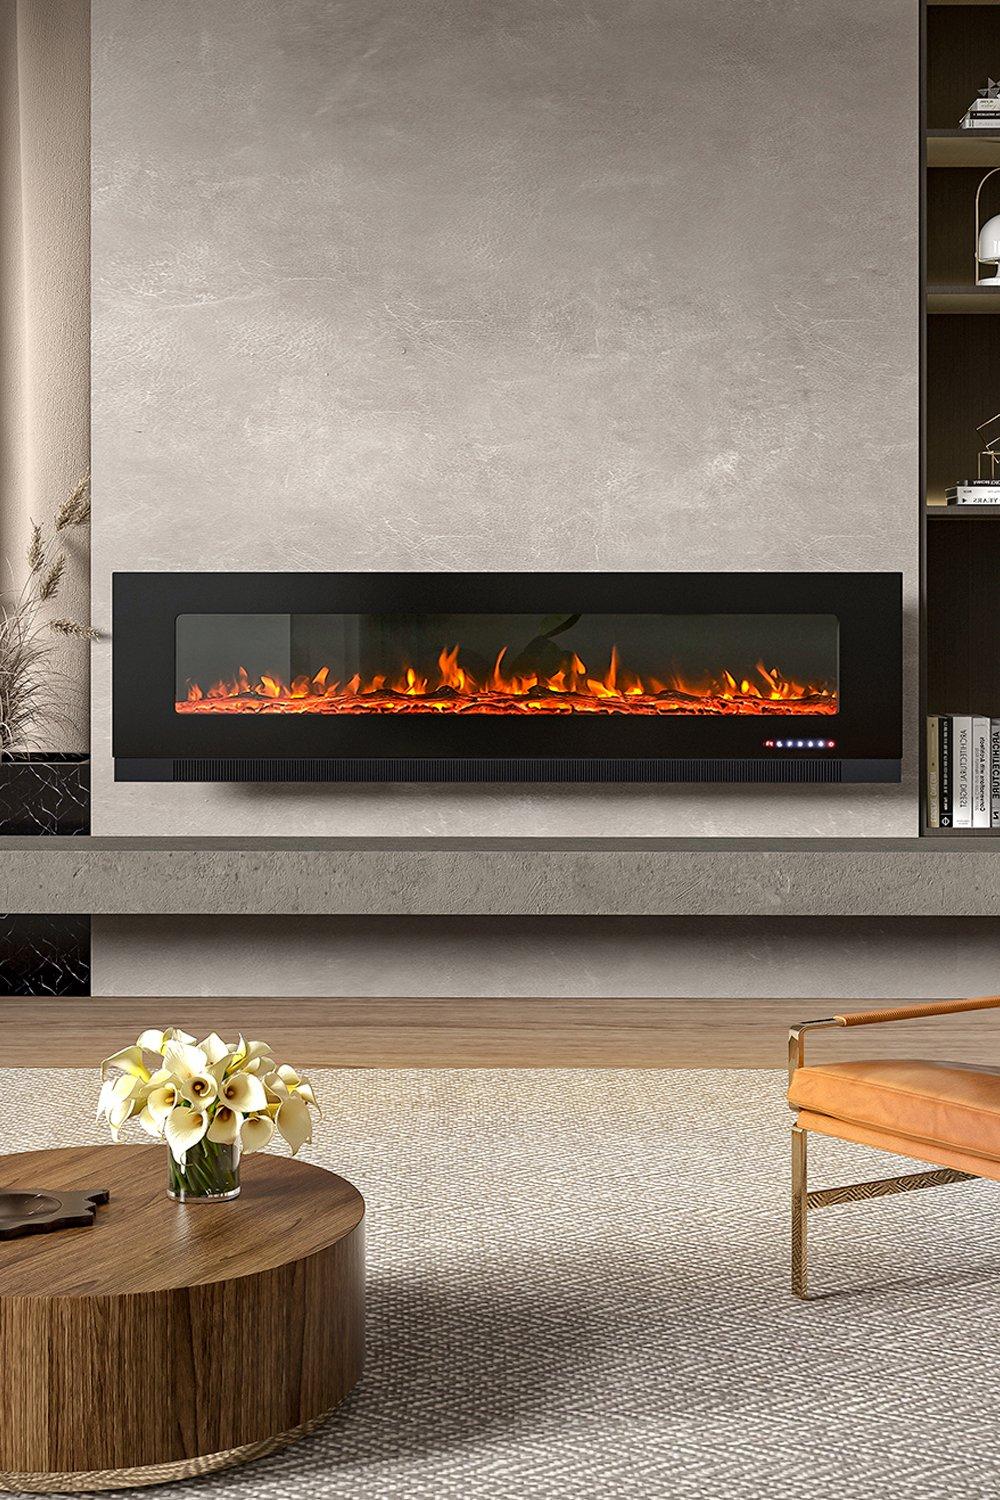 72inch Wall Mounted Electric Fireplace Black